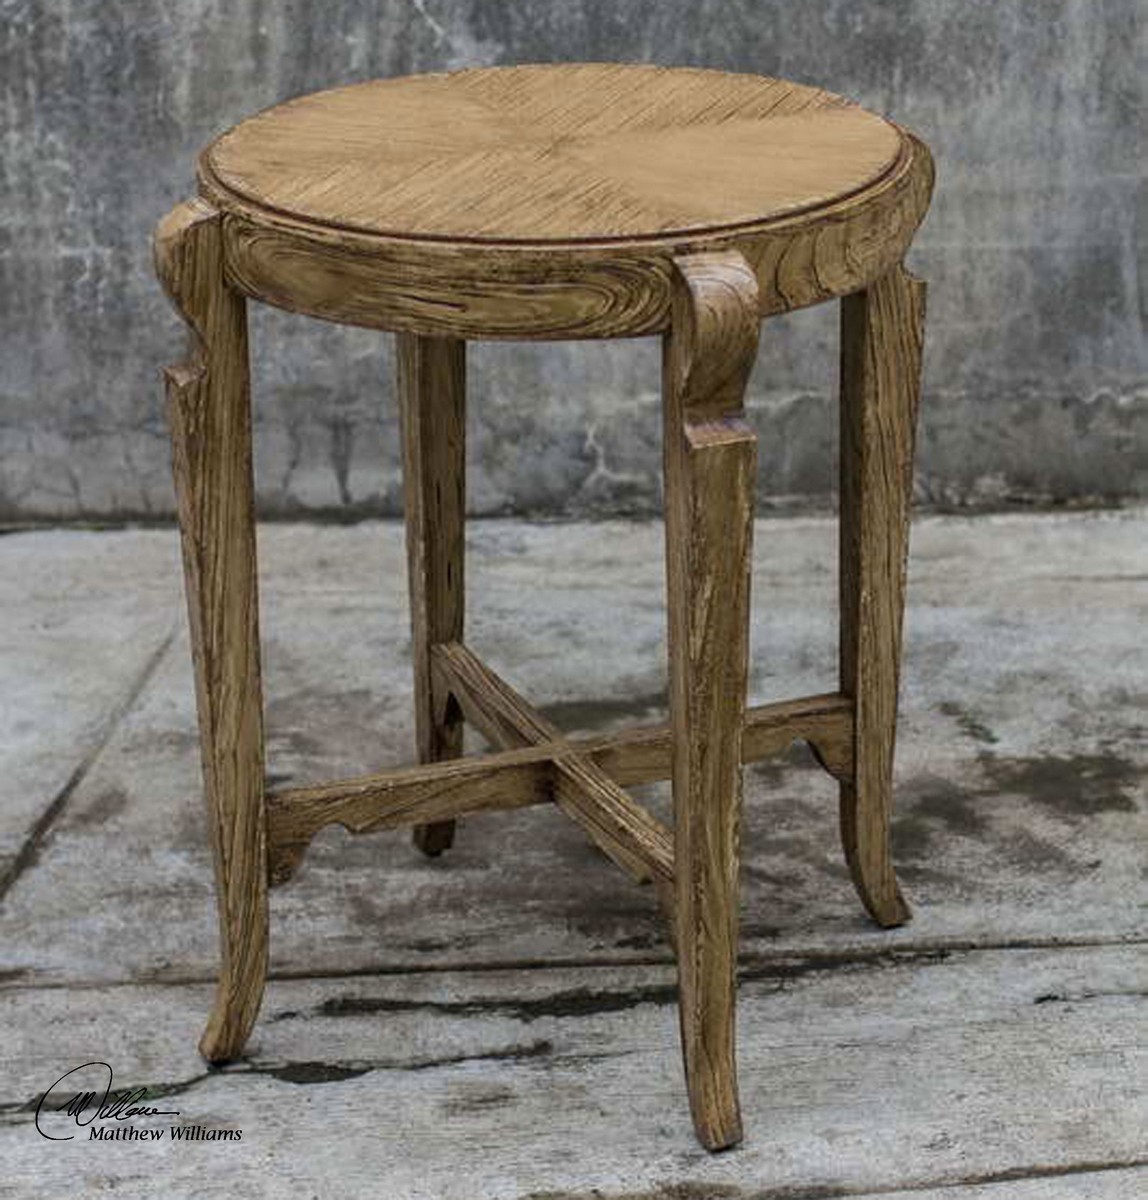 Uttermost Bandi Dstressed Accent Table